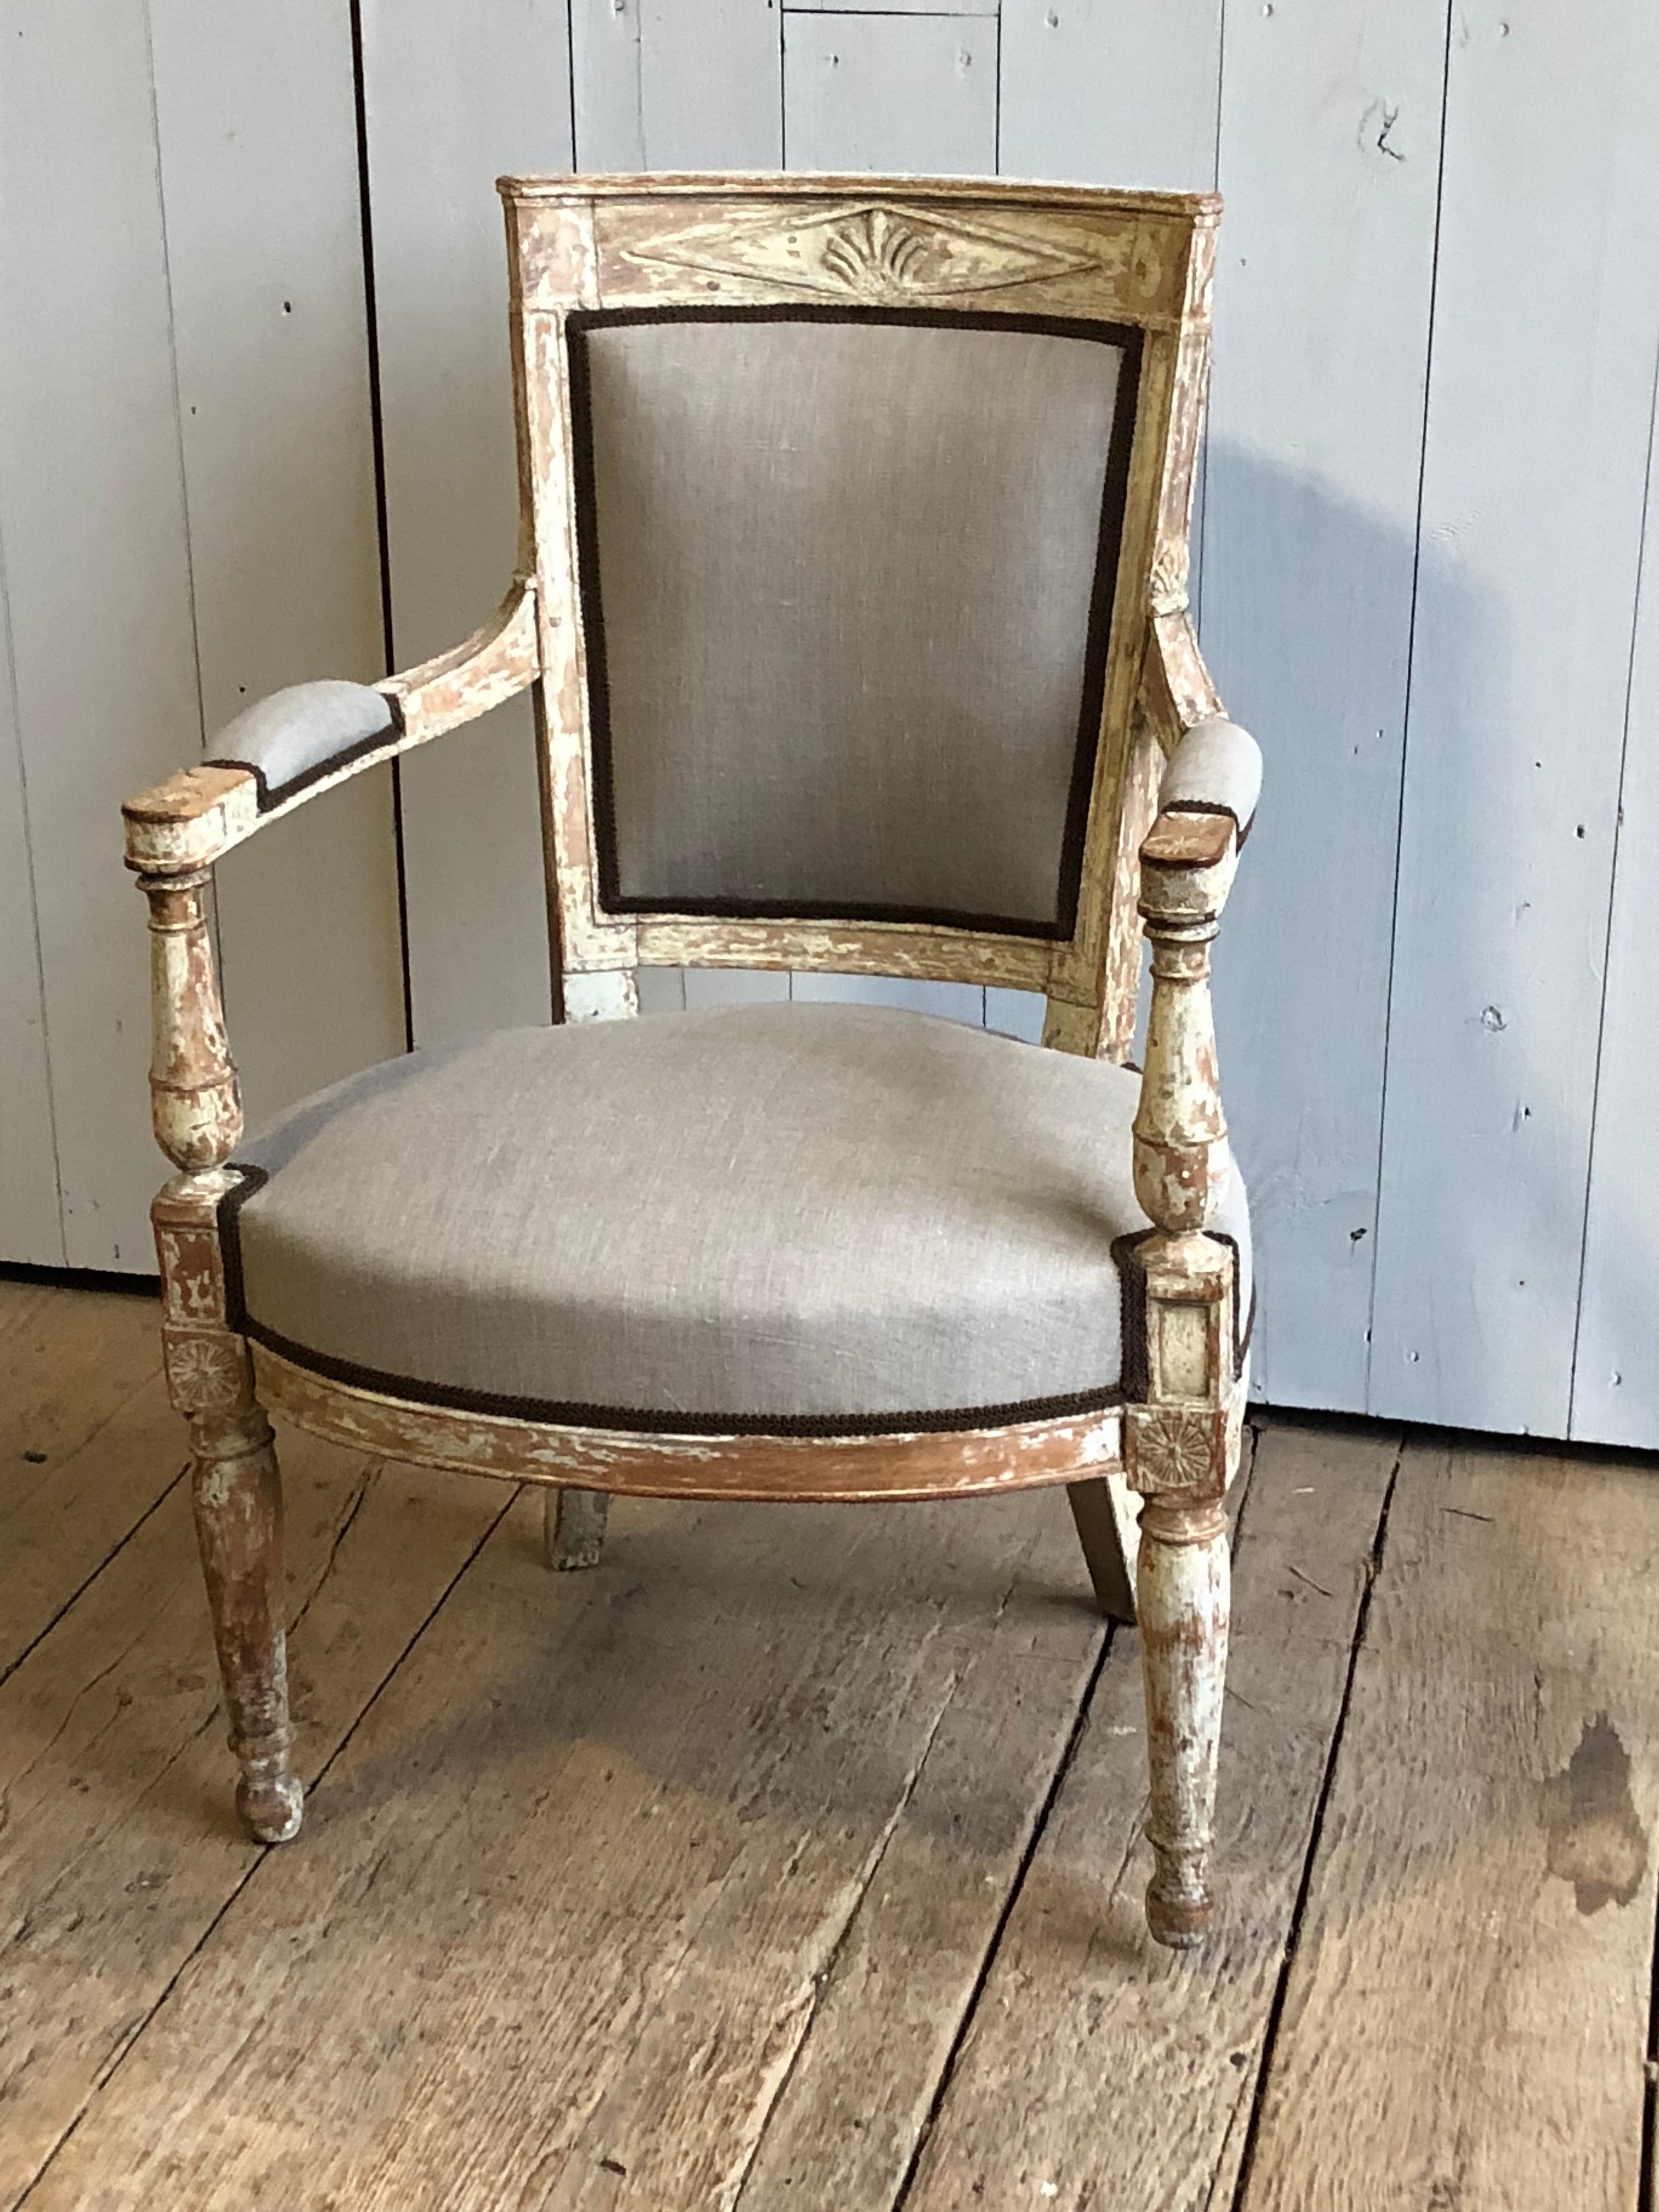 A French neoclassic Fauteuil, Directoire period, circa 1800 with newly upholstered seat and back in grey linen and brown gimp. Original painted finish with carved back rail and armrests. Measures: Arm height 24.5”.